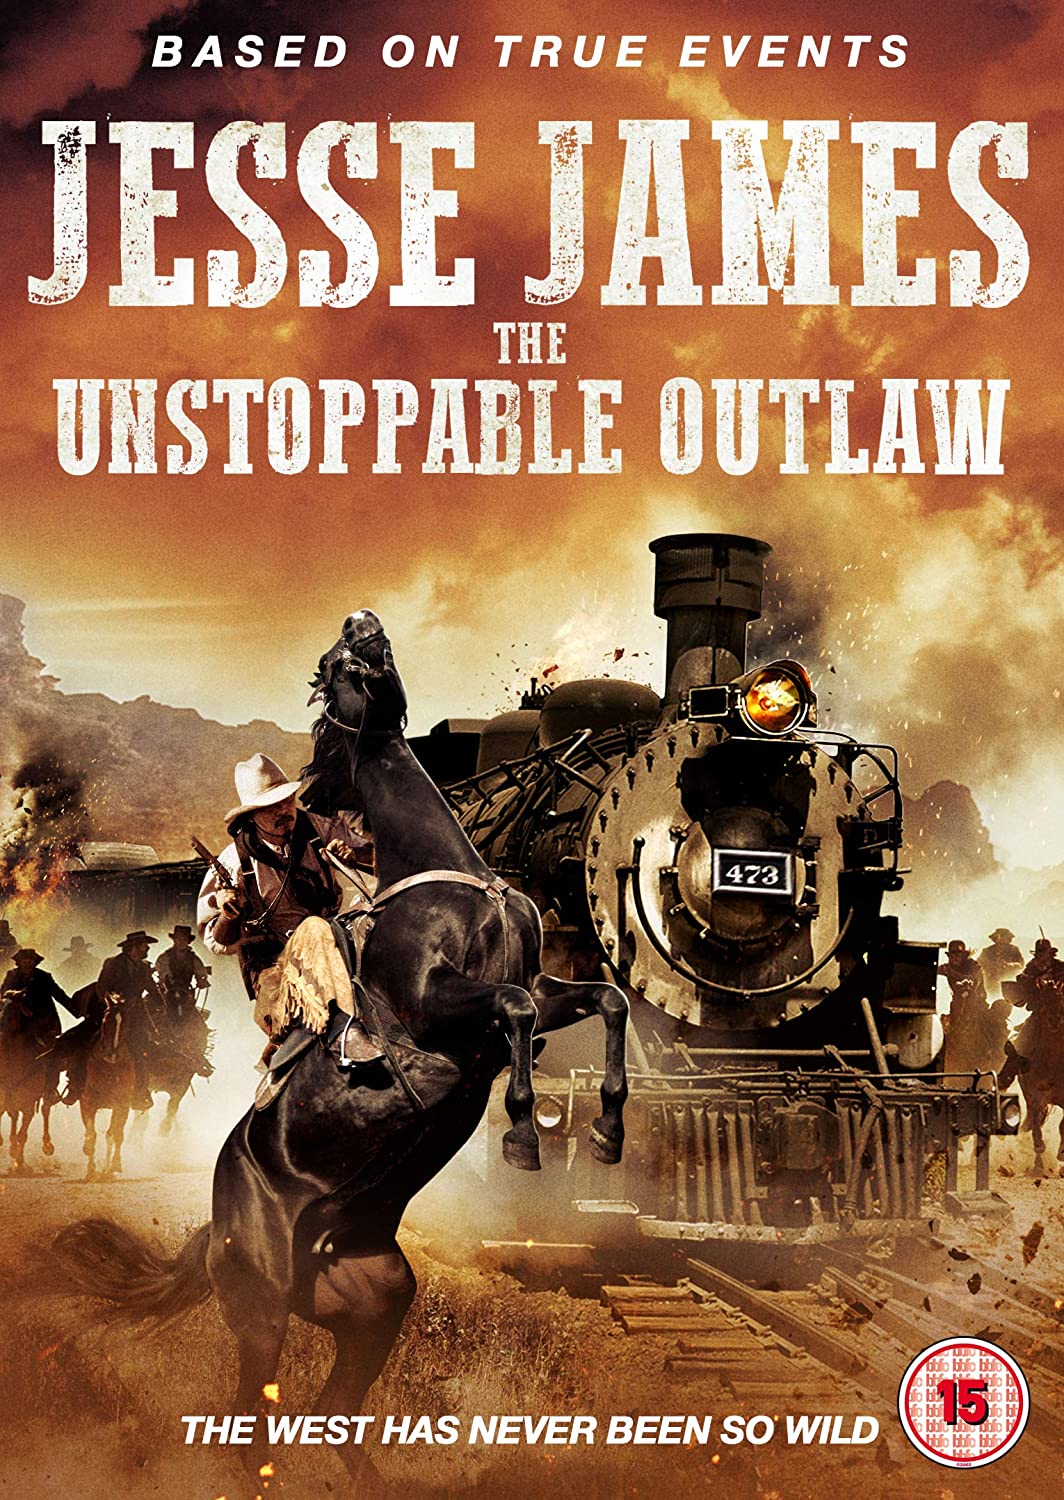 Jesse James The Unstoppable Outlaw [DVD]